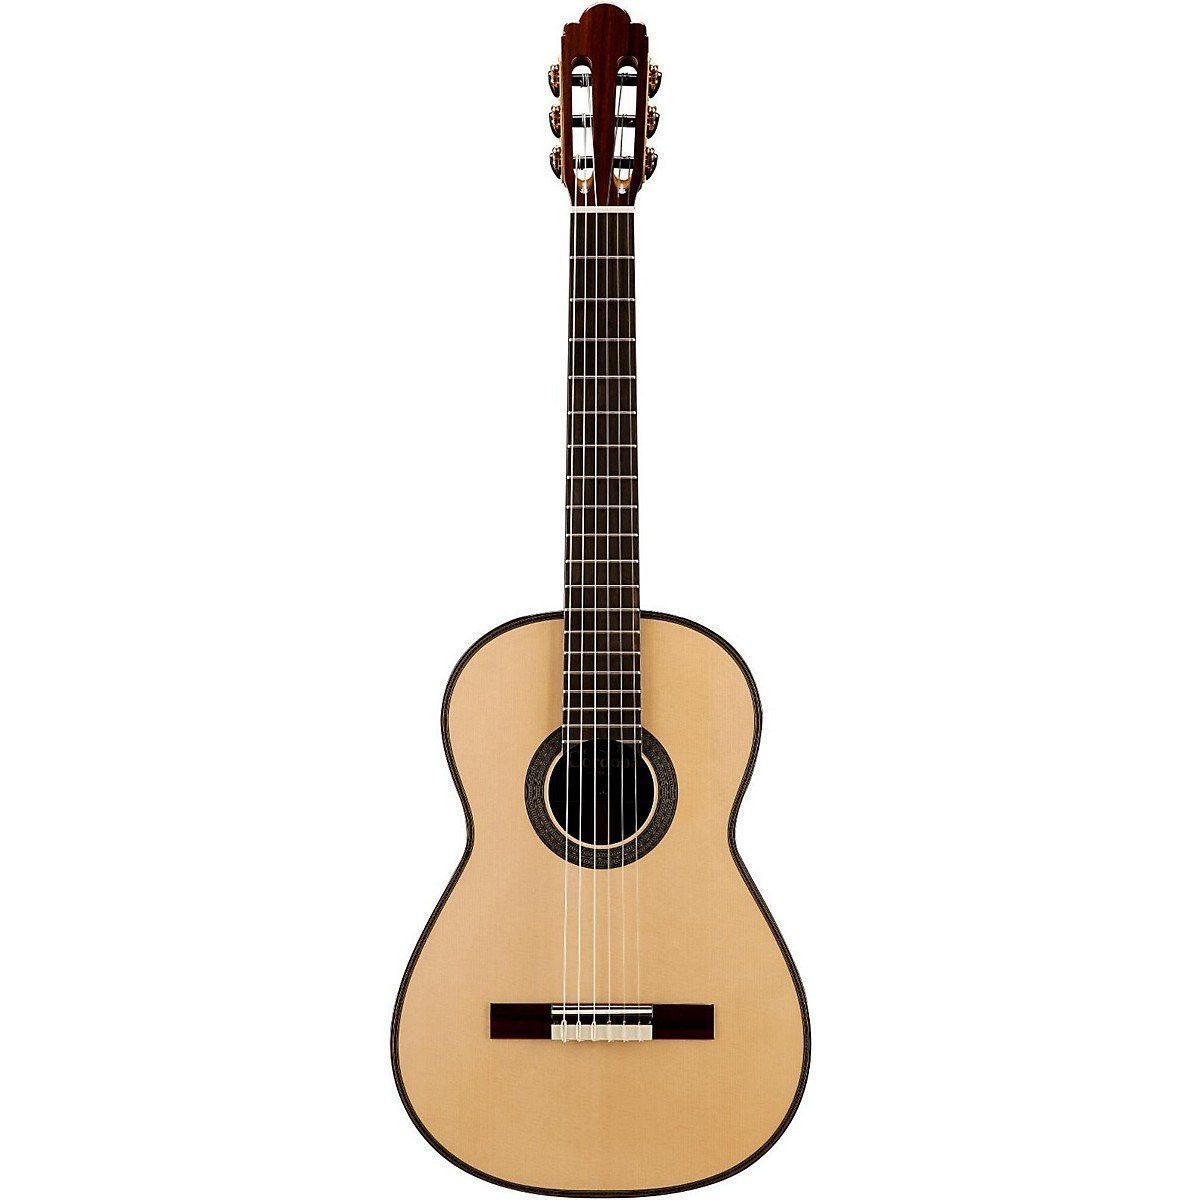 Cordoba Master Series - Torres - Solid Spruce Top - 2021 - Solid Indian Rosewood Back/Sides - Handmade in USA